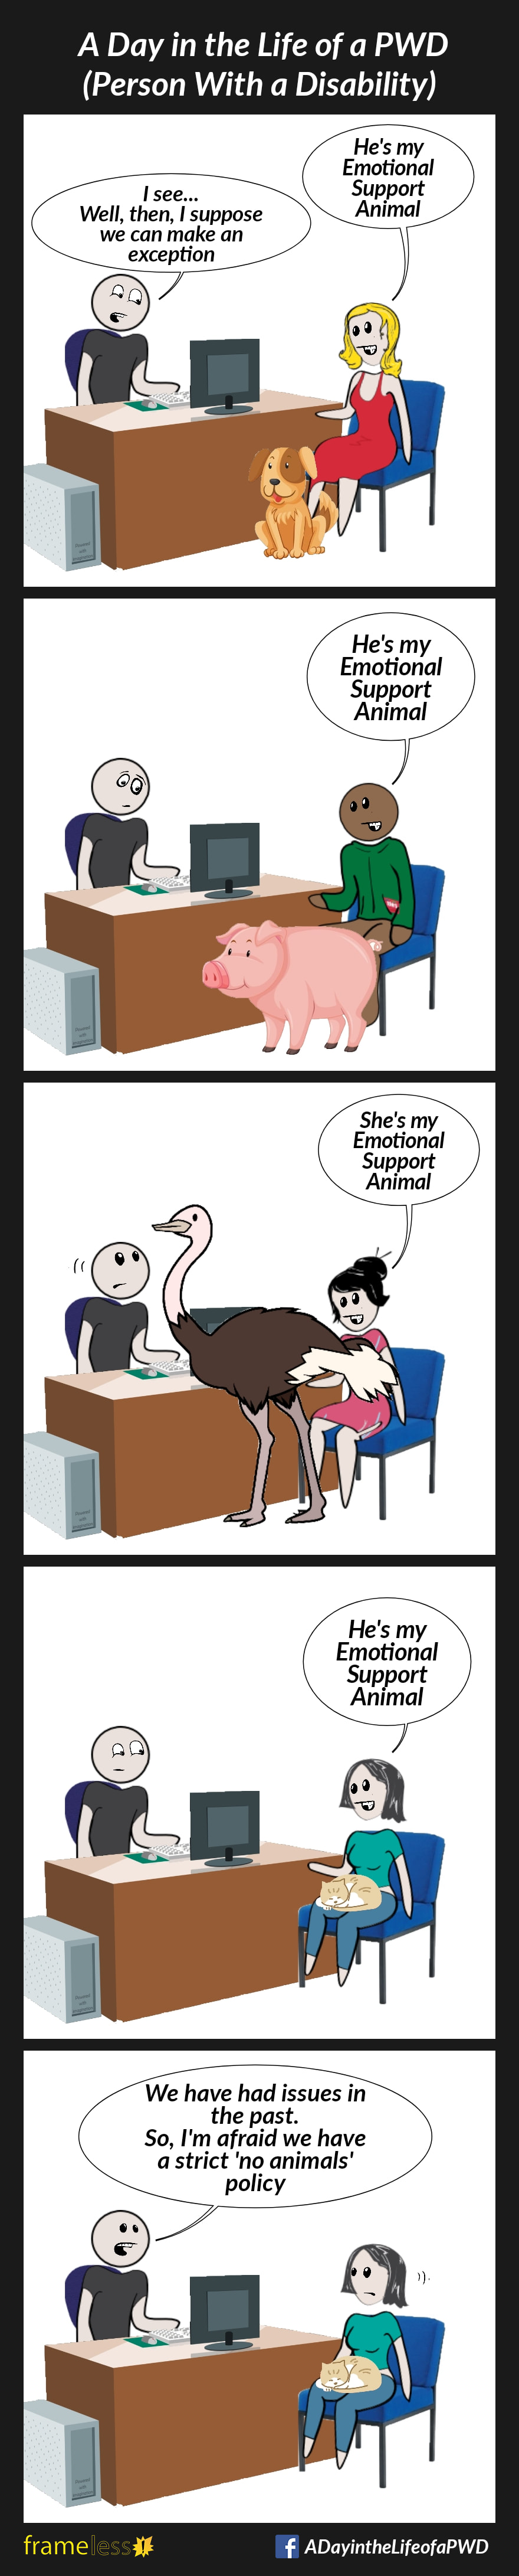 COMIC STRIP 
A Day in the Life of a PWD (Person With a Disability) 

Frame 1:
A woman is sitting in an office, speaking to a manager behind a desk. A medium sized dog sits at her feet.
WOMAN: He's my Emotional Support Animal 
MANAGER: I see...Well, then, I suppose we can make a exception 

Frame 2:
Sometime later, a man now sits in the office, with a large pig.
MAN: He's my Emotional Support Animal 
The manager appears uncertain. 

Frame 3:
Sometime later, a woman now sits in the office. An ostrich stands towering over the manager. 
WOMAN: She's my Emotional Support Animal 
The manager appears disturbed.

Frame 4:
Sometime later, another wonan is sitting in the office, with a small cat curled in her lap.
WOMAN: He's my Emotional Support Animal 
The manager appears suspicious.

Frame 5:
MANAGER: We have had issues in the past. So, I'm afraid we have a strict 'no animals' policy